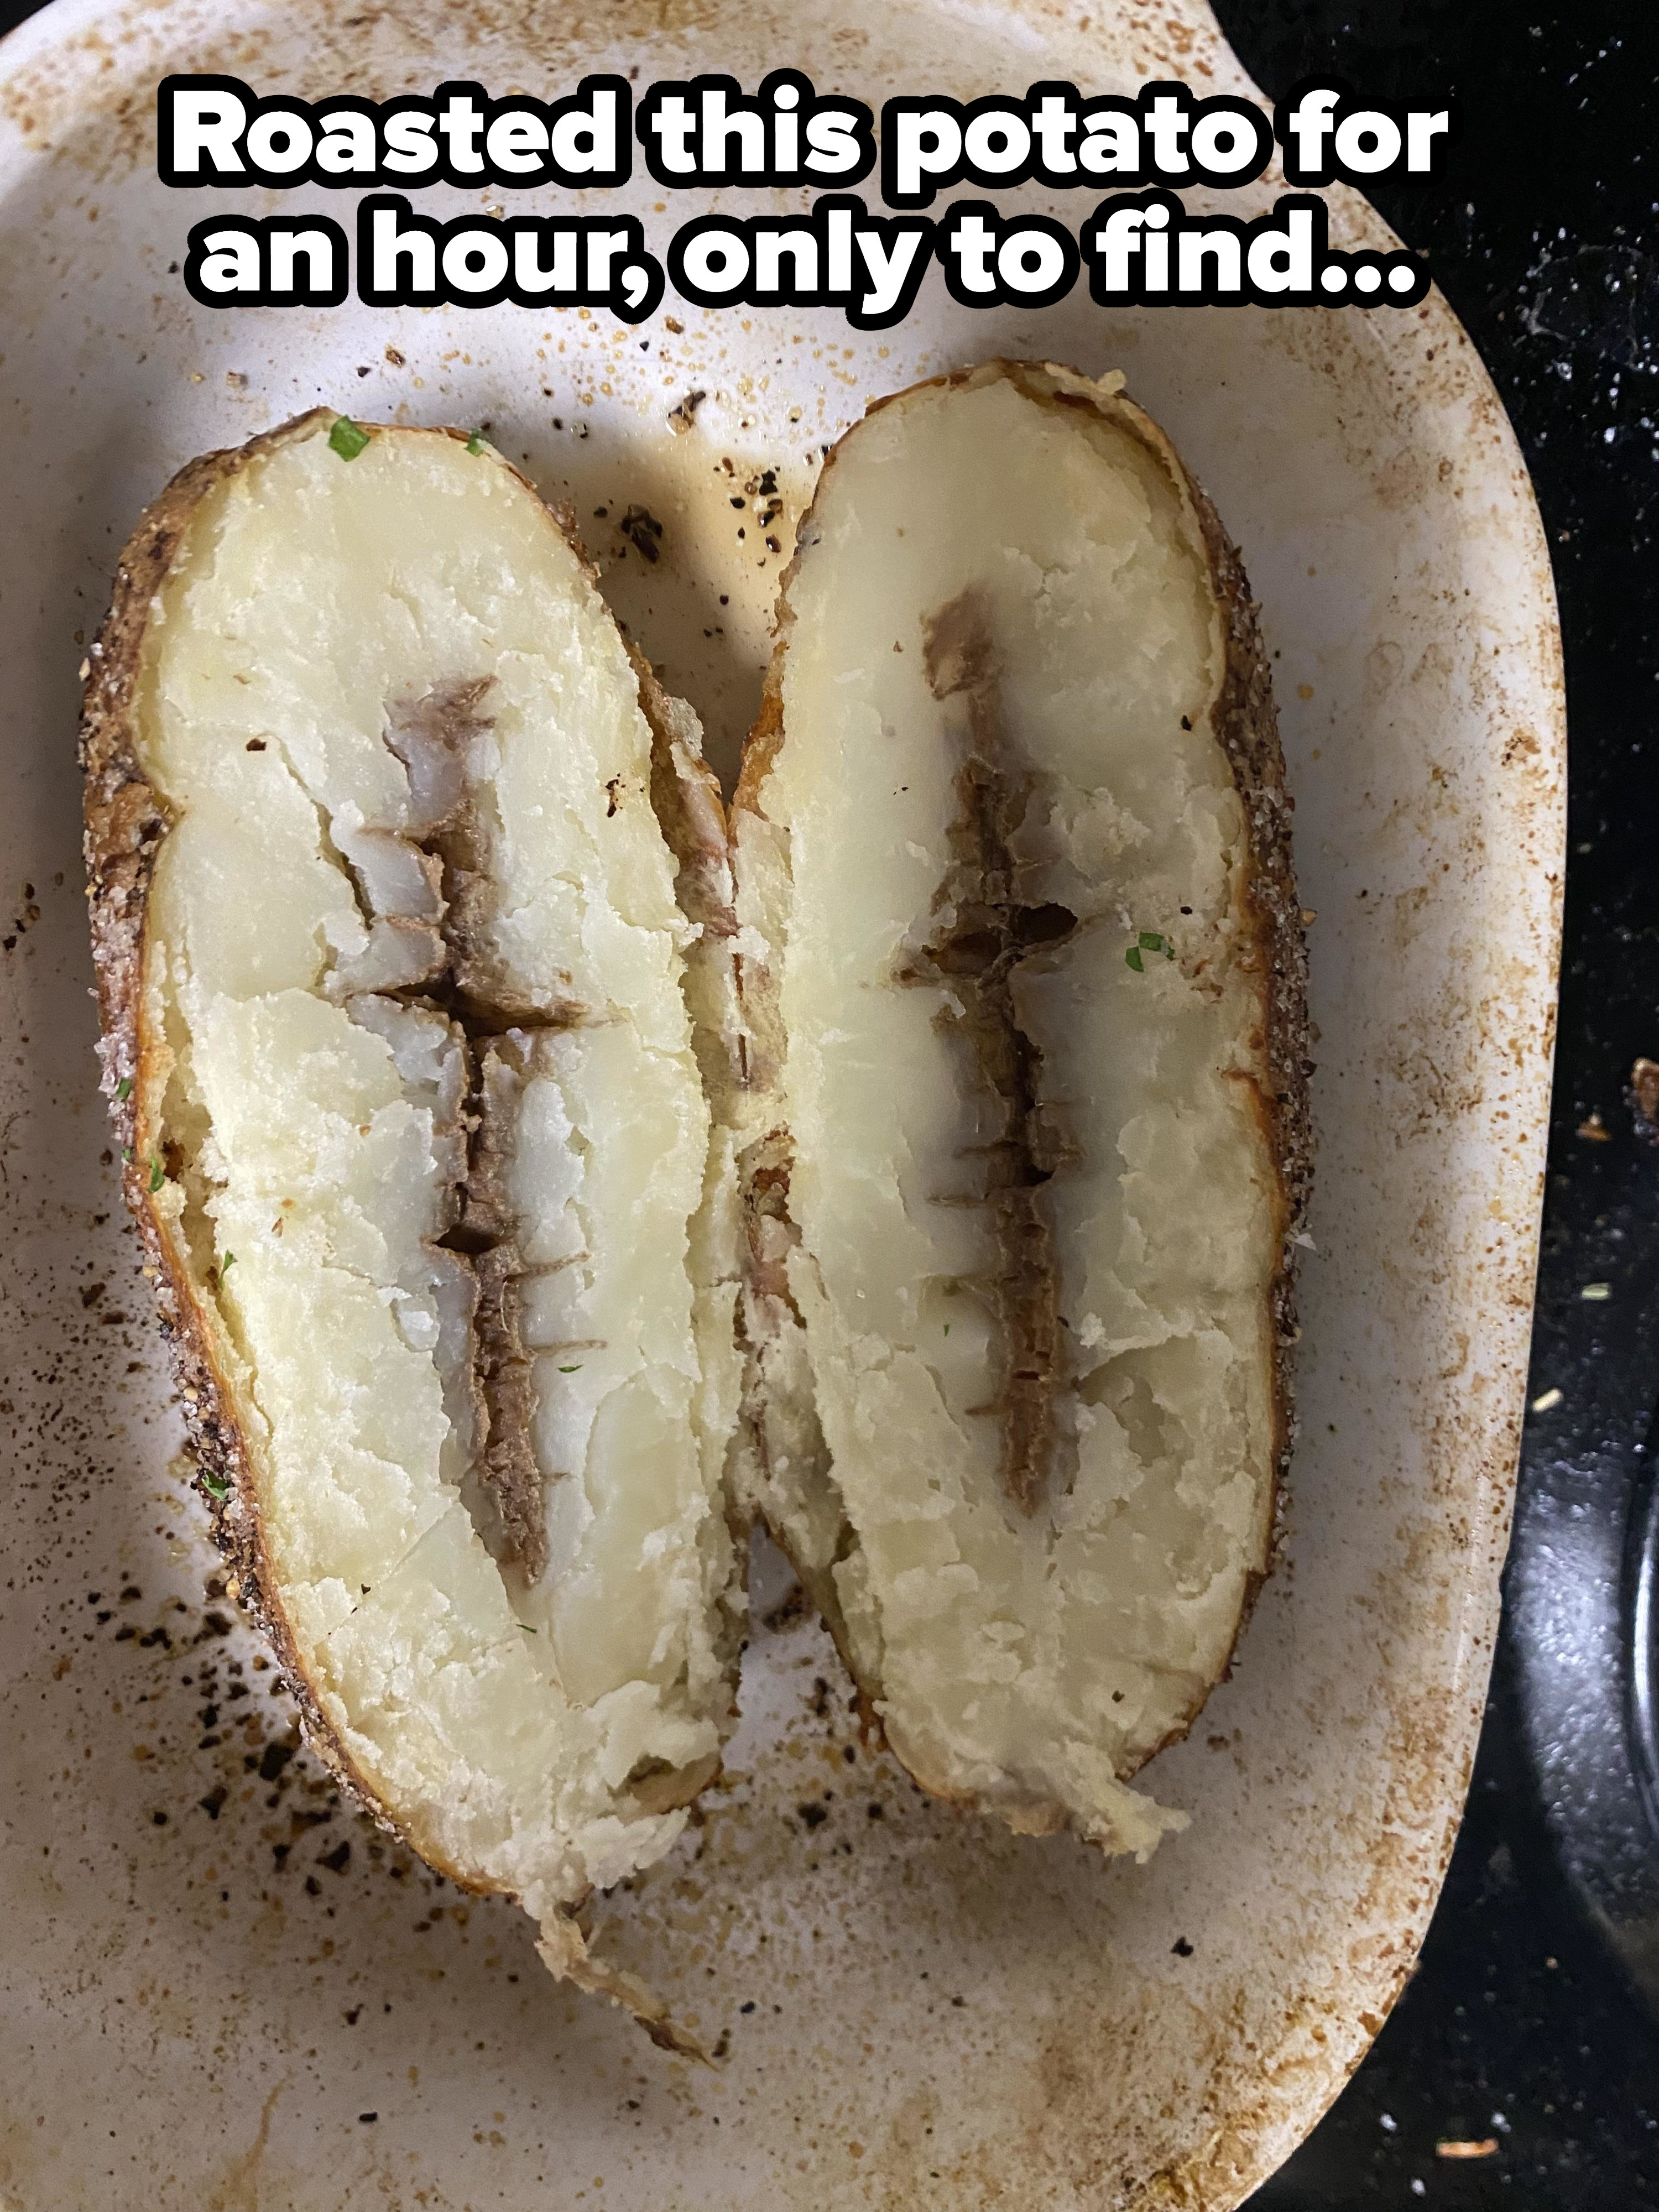 A baked potato cut in half and showing the rotten core